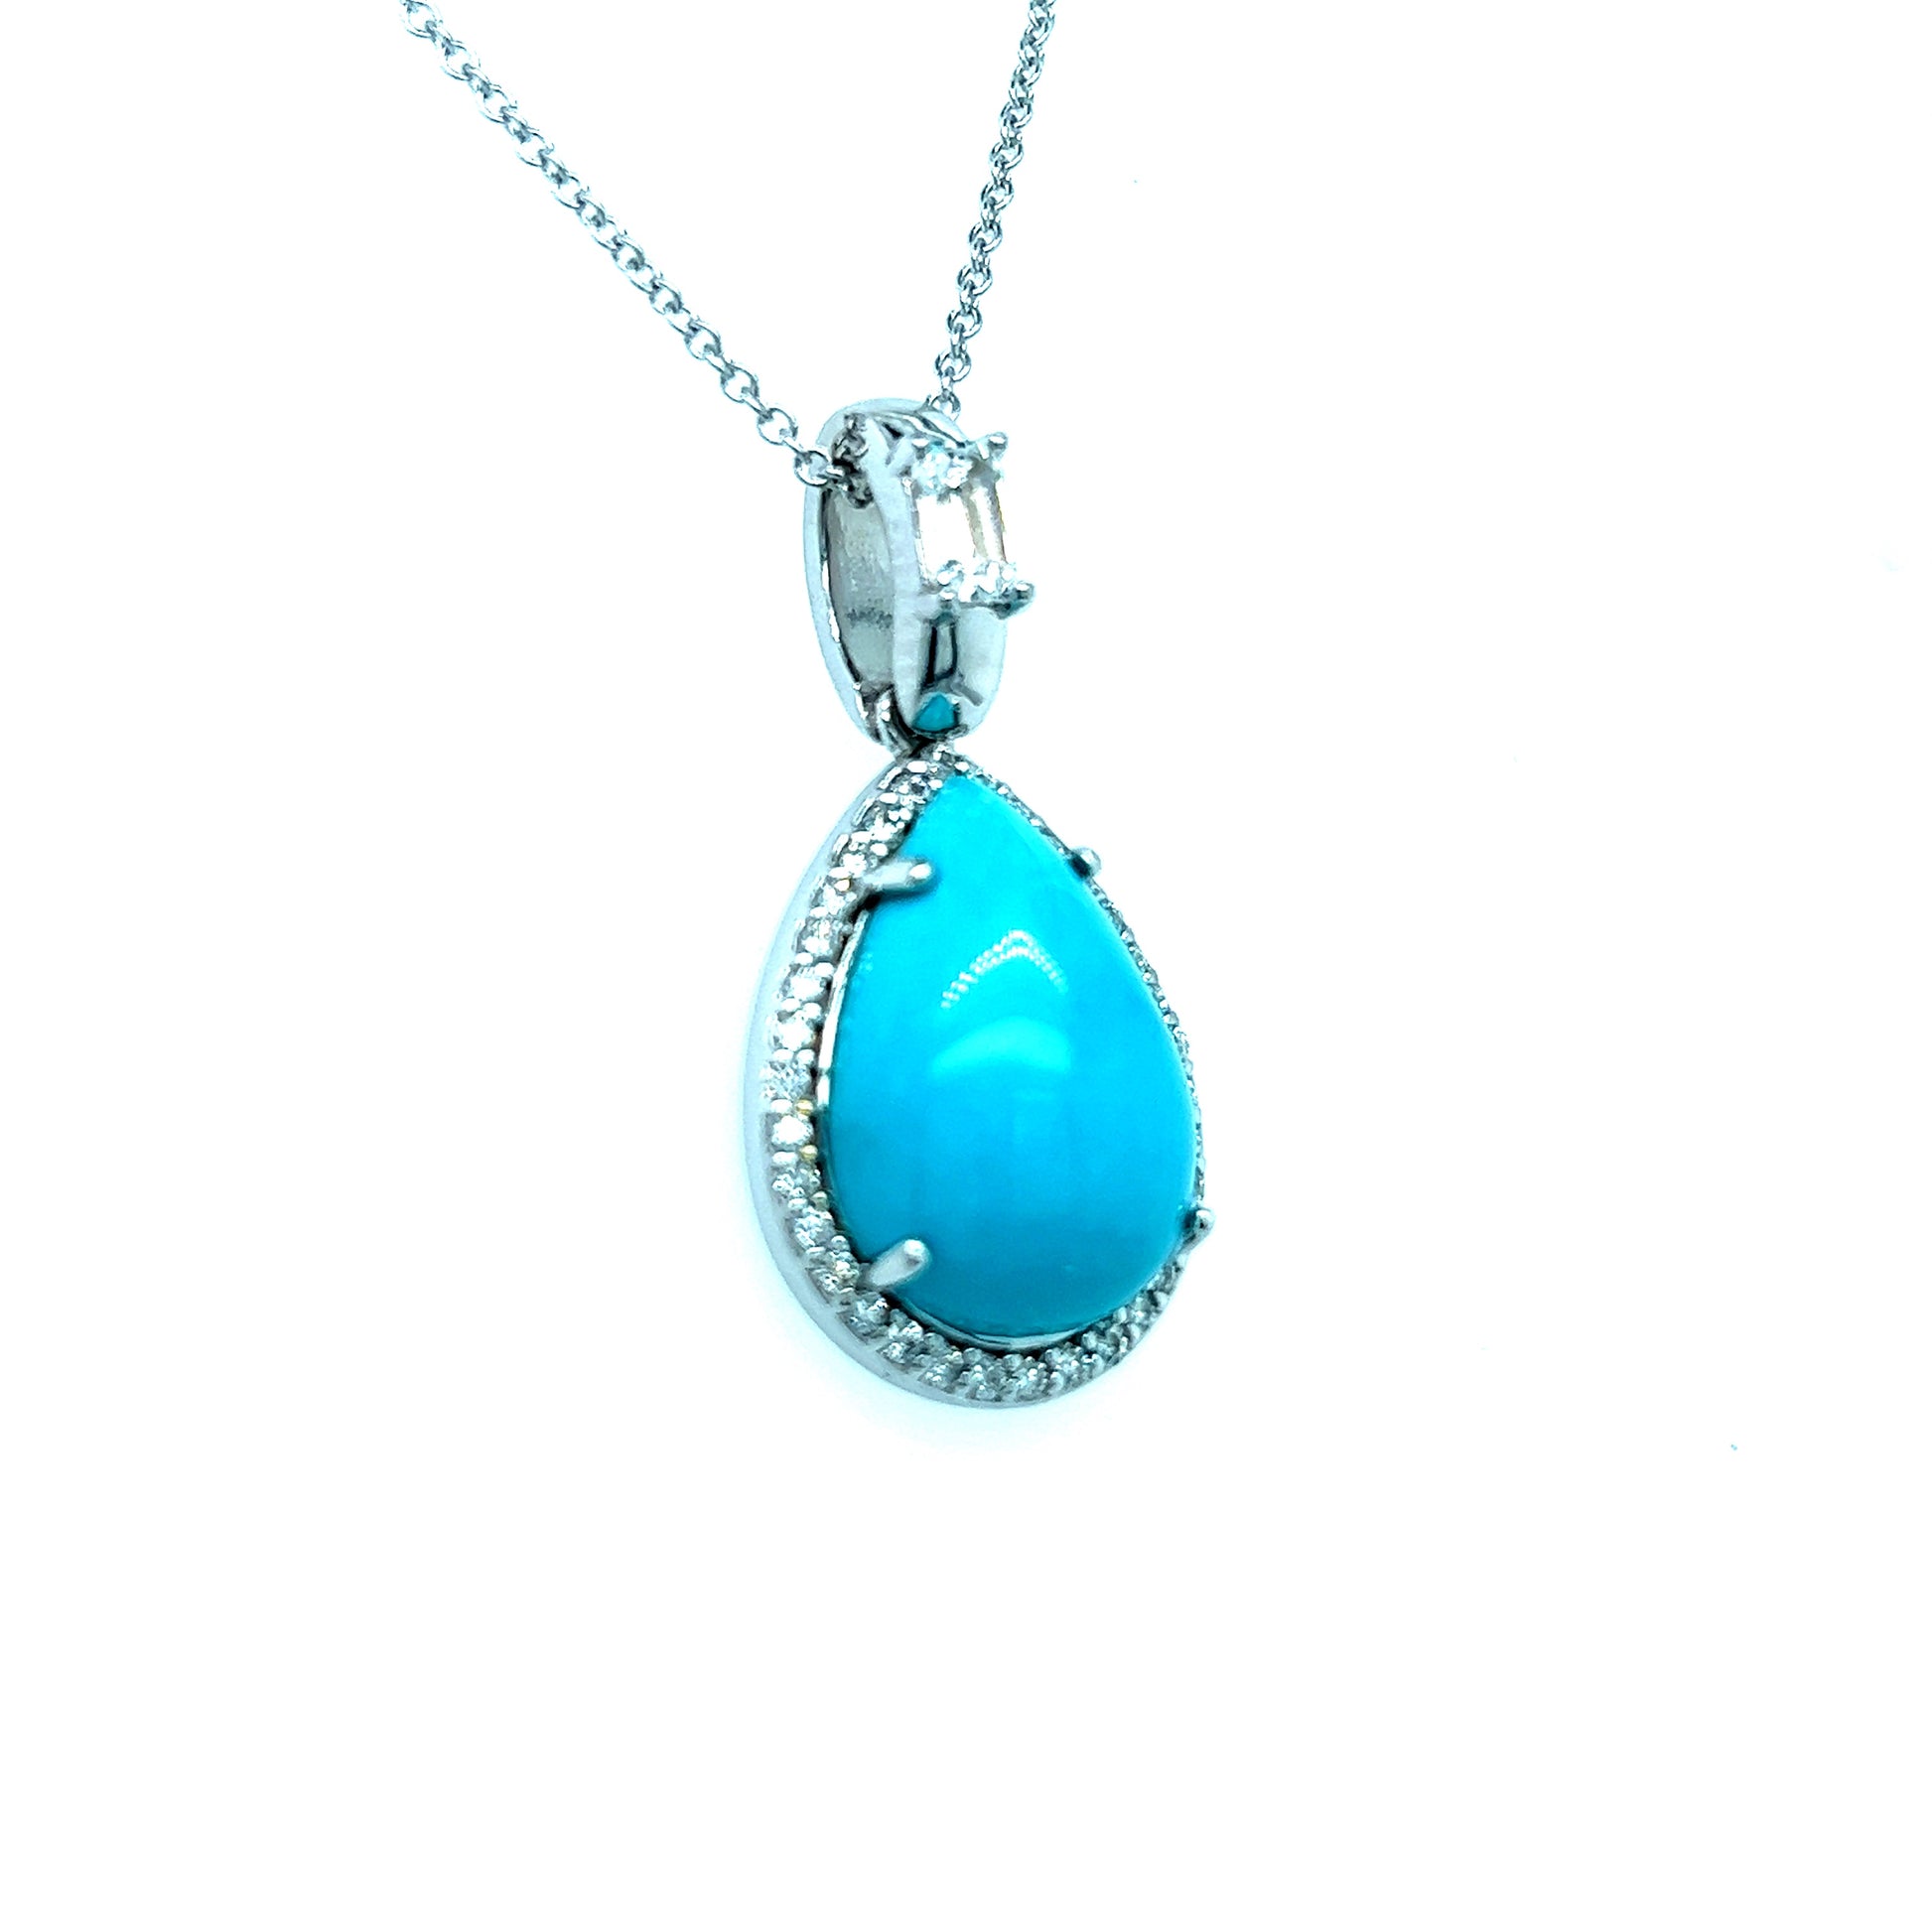 Natural Persian Turquoise Sapphire Diamond Pendant Necklace 18" 14k WG 8.44 TCW Certified $5,975 219119